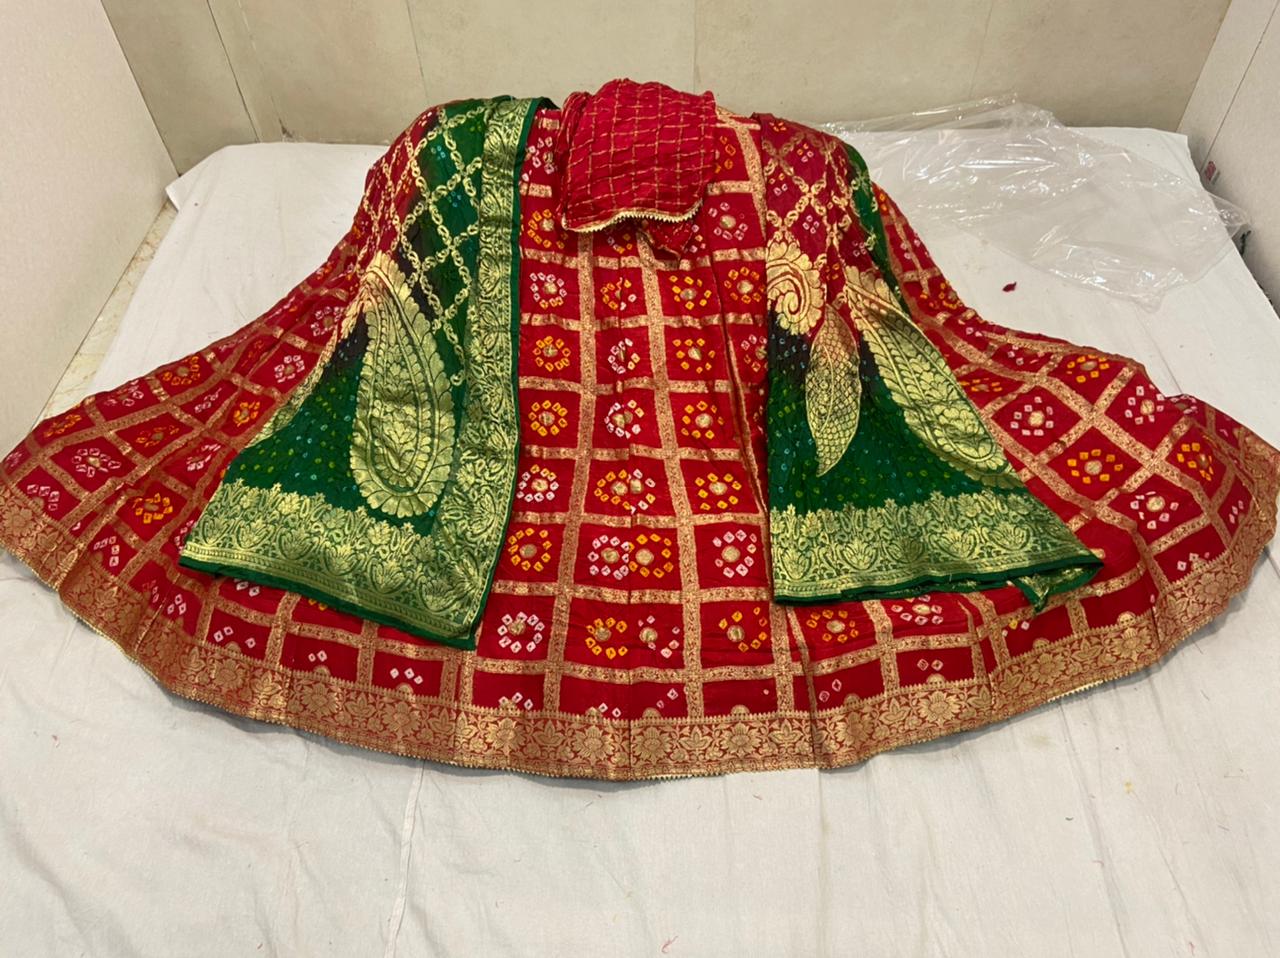 Rajasthani Bride Designed A Red 'Poshak' With Traditional White 'Chooda'  For Her Wedding Day